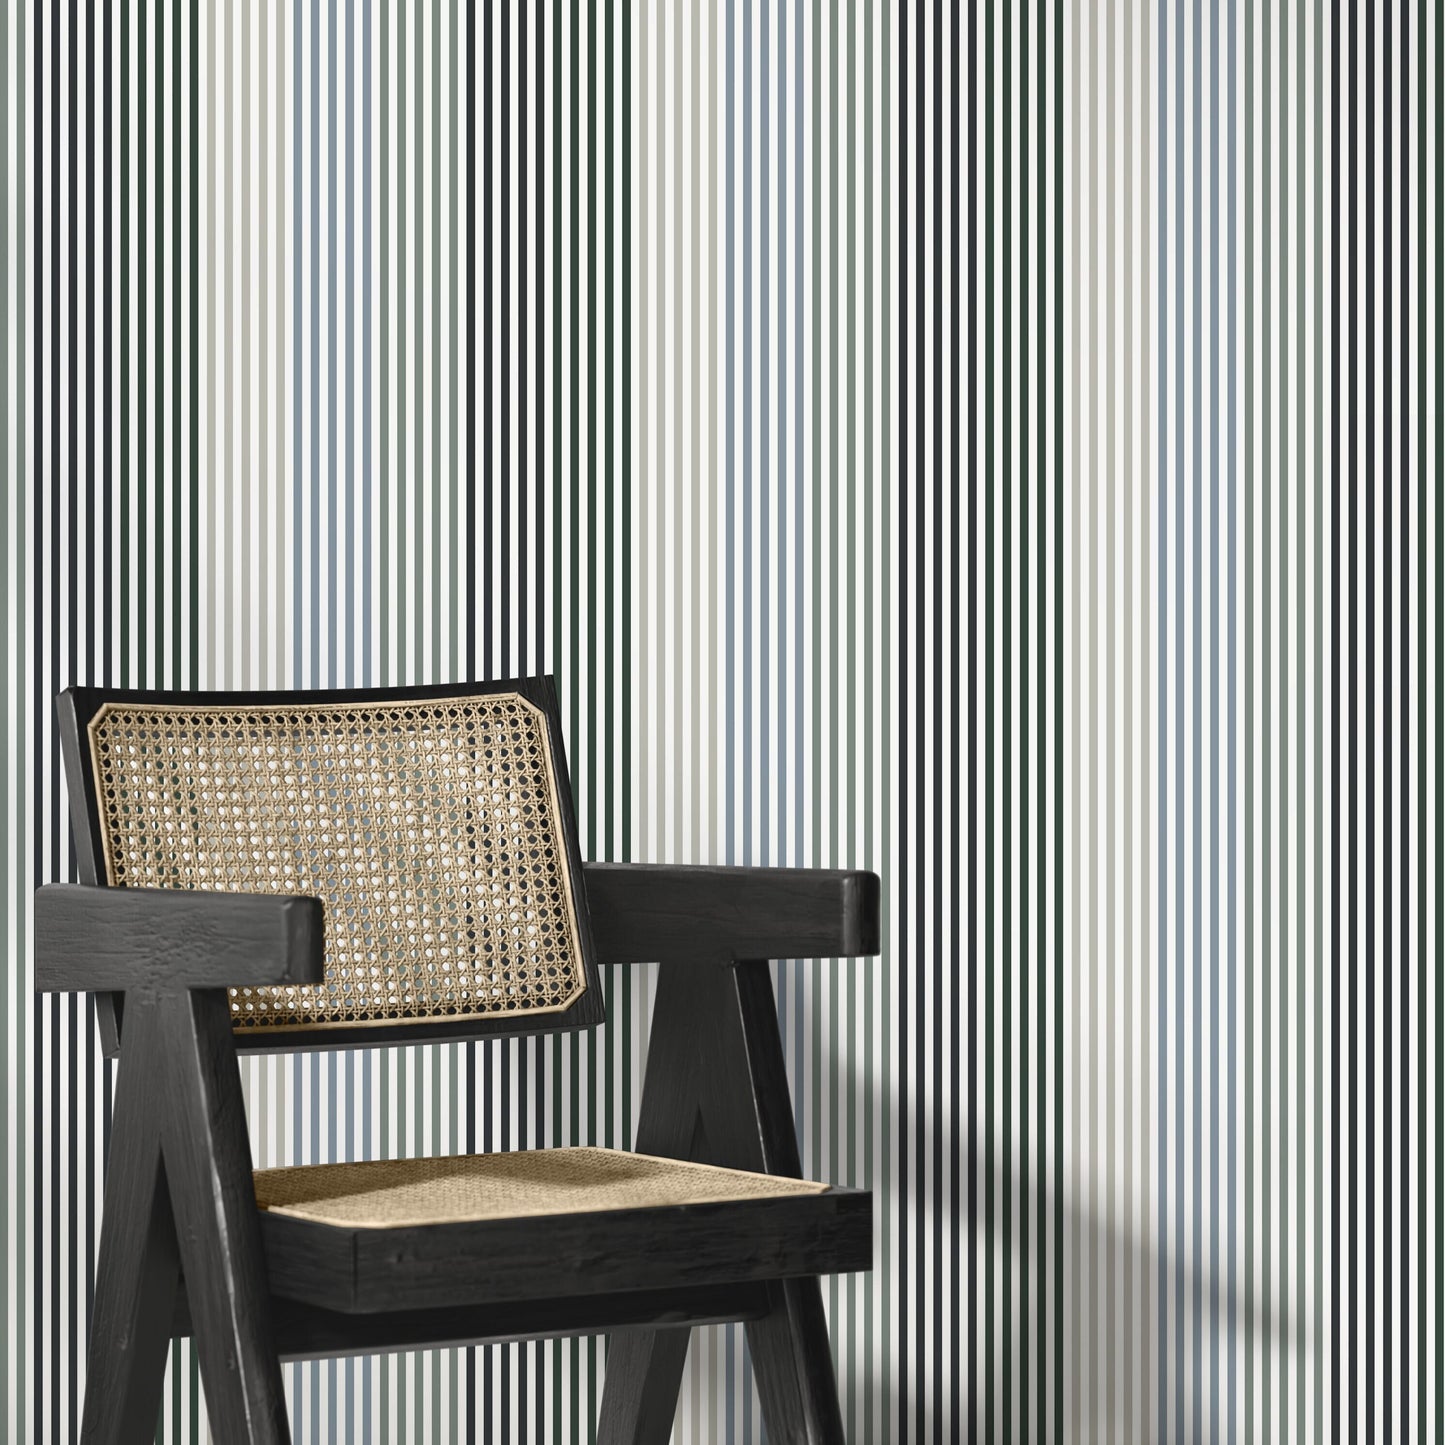 Geometric Striped Wallpaper Modern Wallpaper Peel and Stick and Traditional Wallpaper - D756